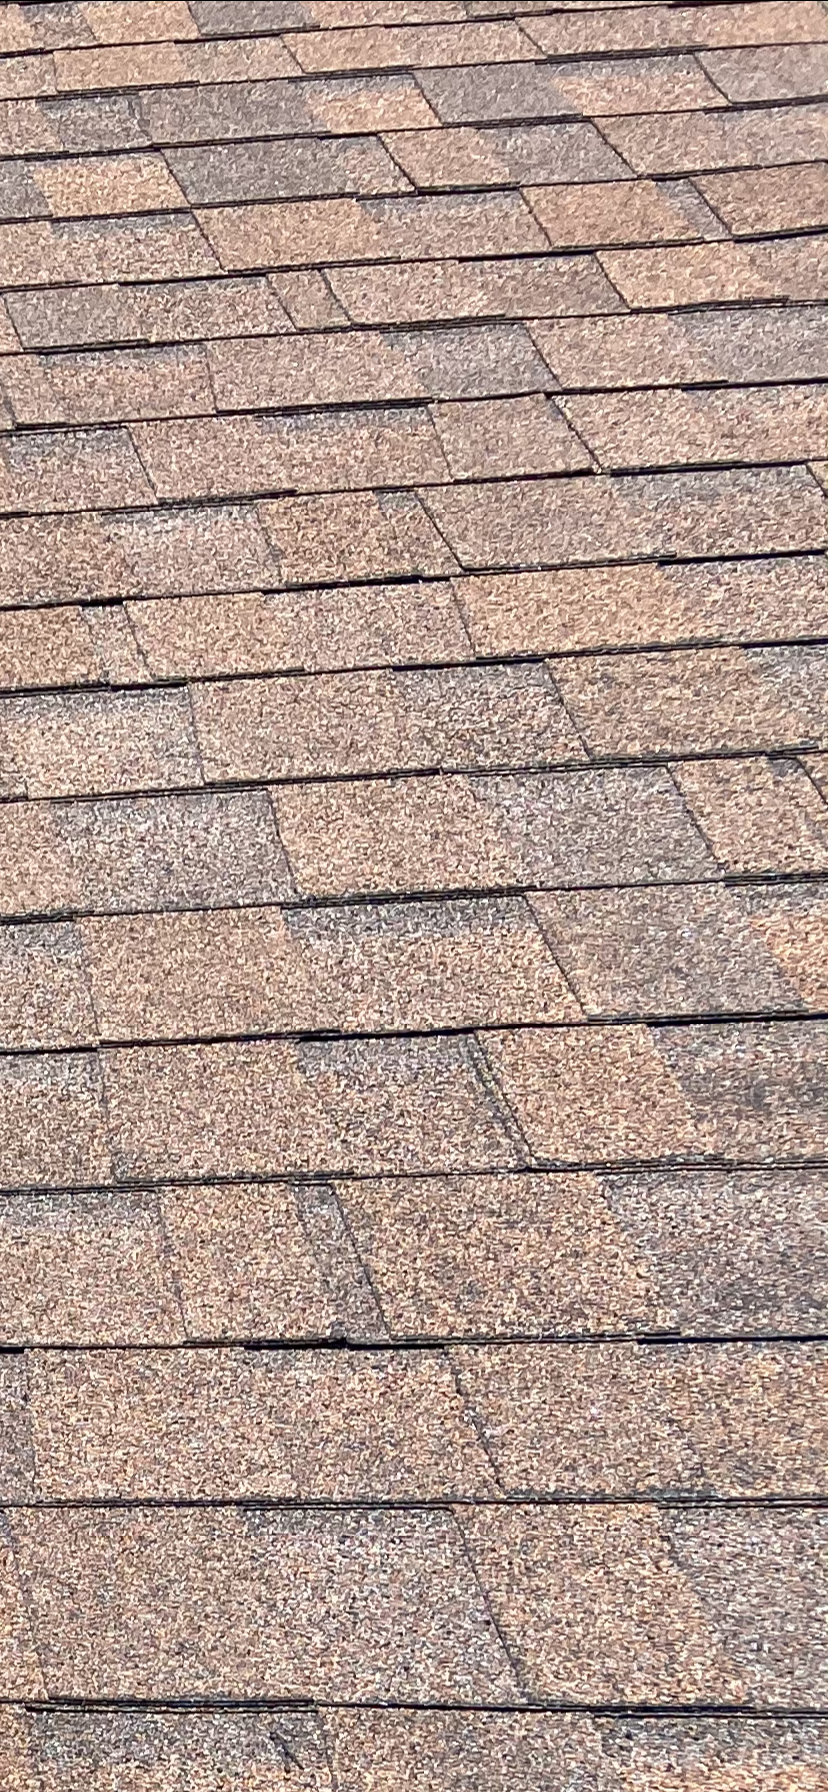 This is a close up view of shingles that have blistered.